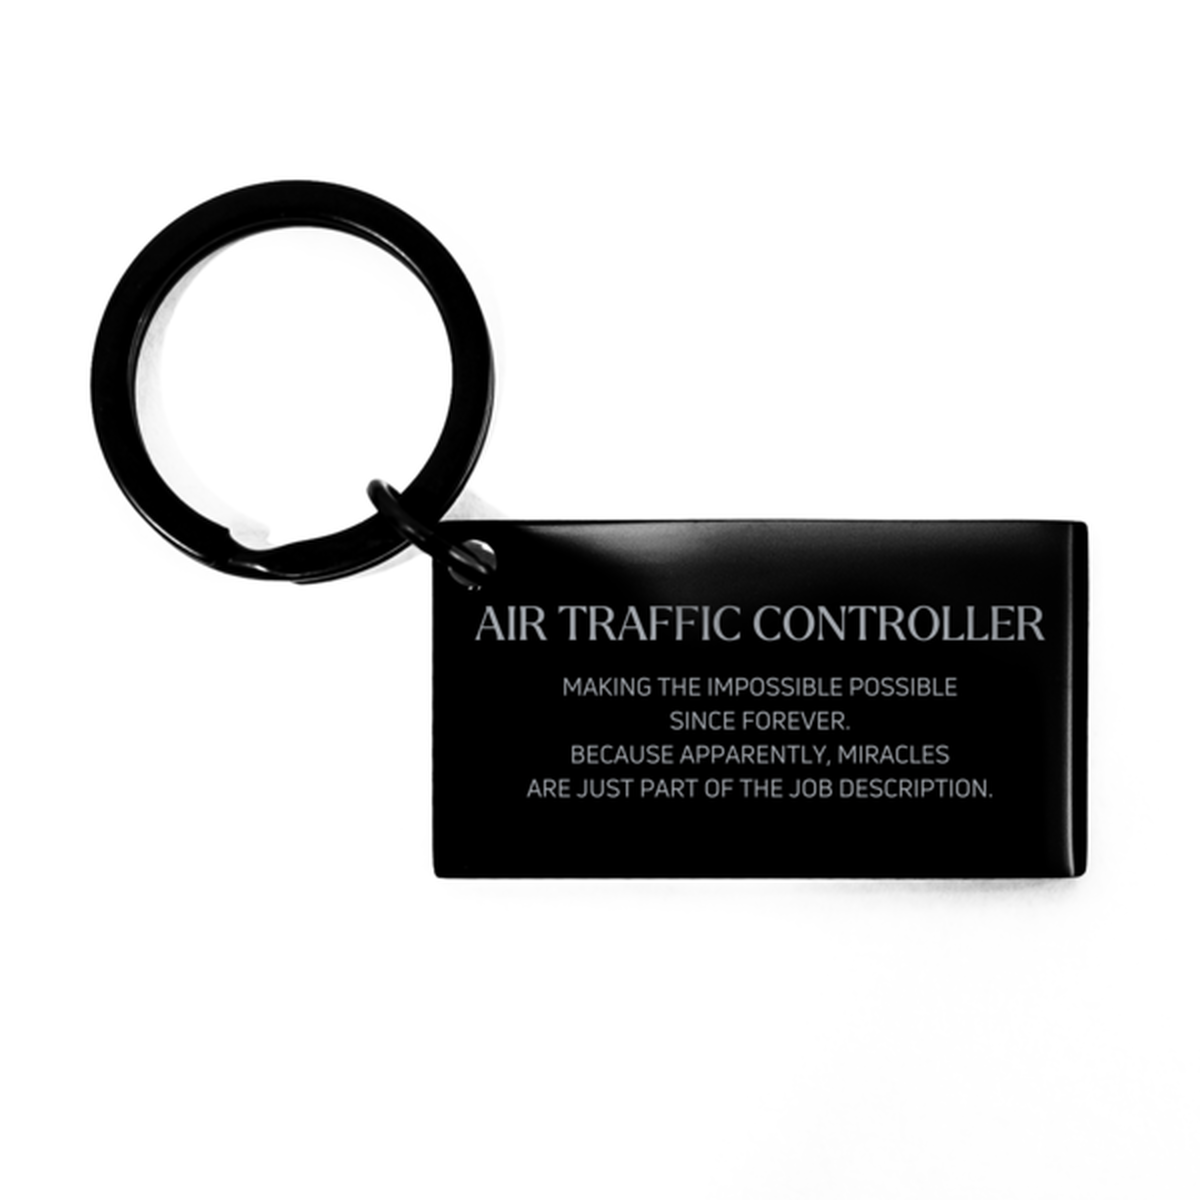 Funny Air Traffic Controller Gifts, Miracles are just part of the job description, Inspirational Birthday Keychain For Air Traffic Controller, Men, Women, Coworkers, Friends, Boss